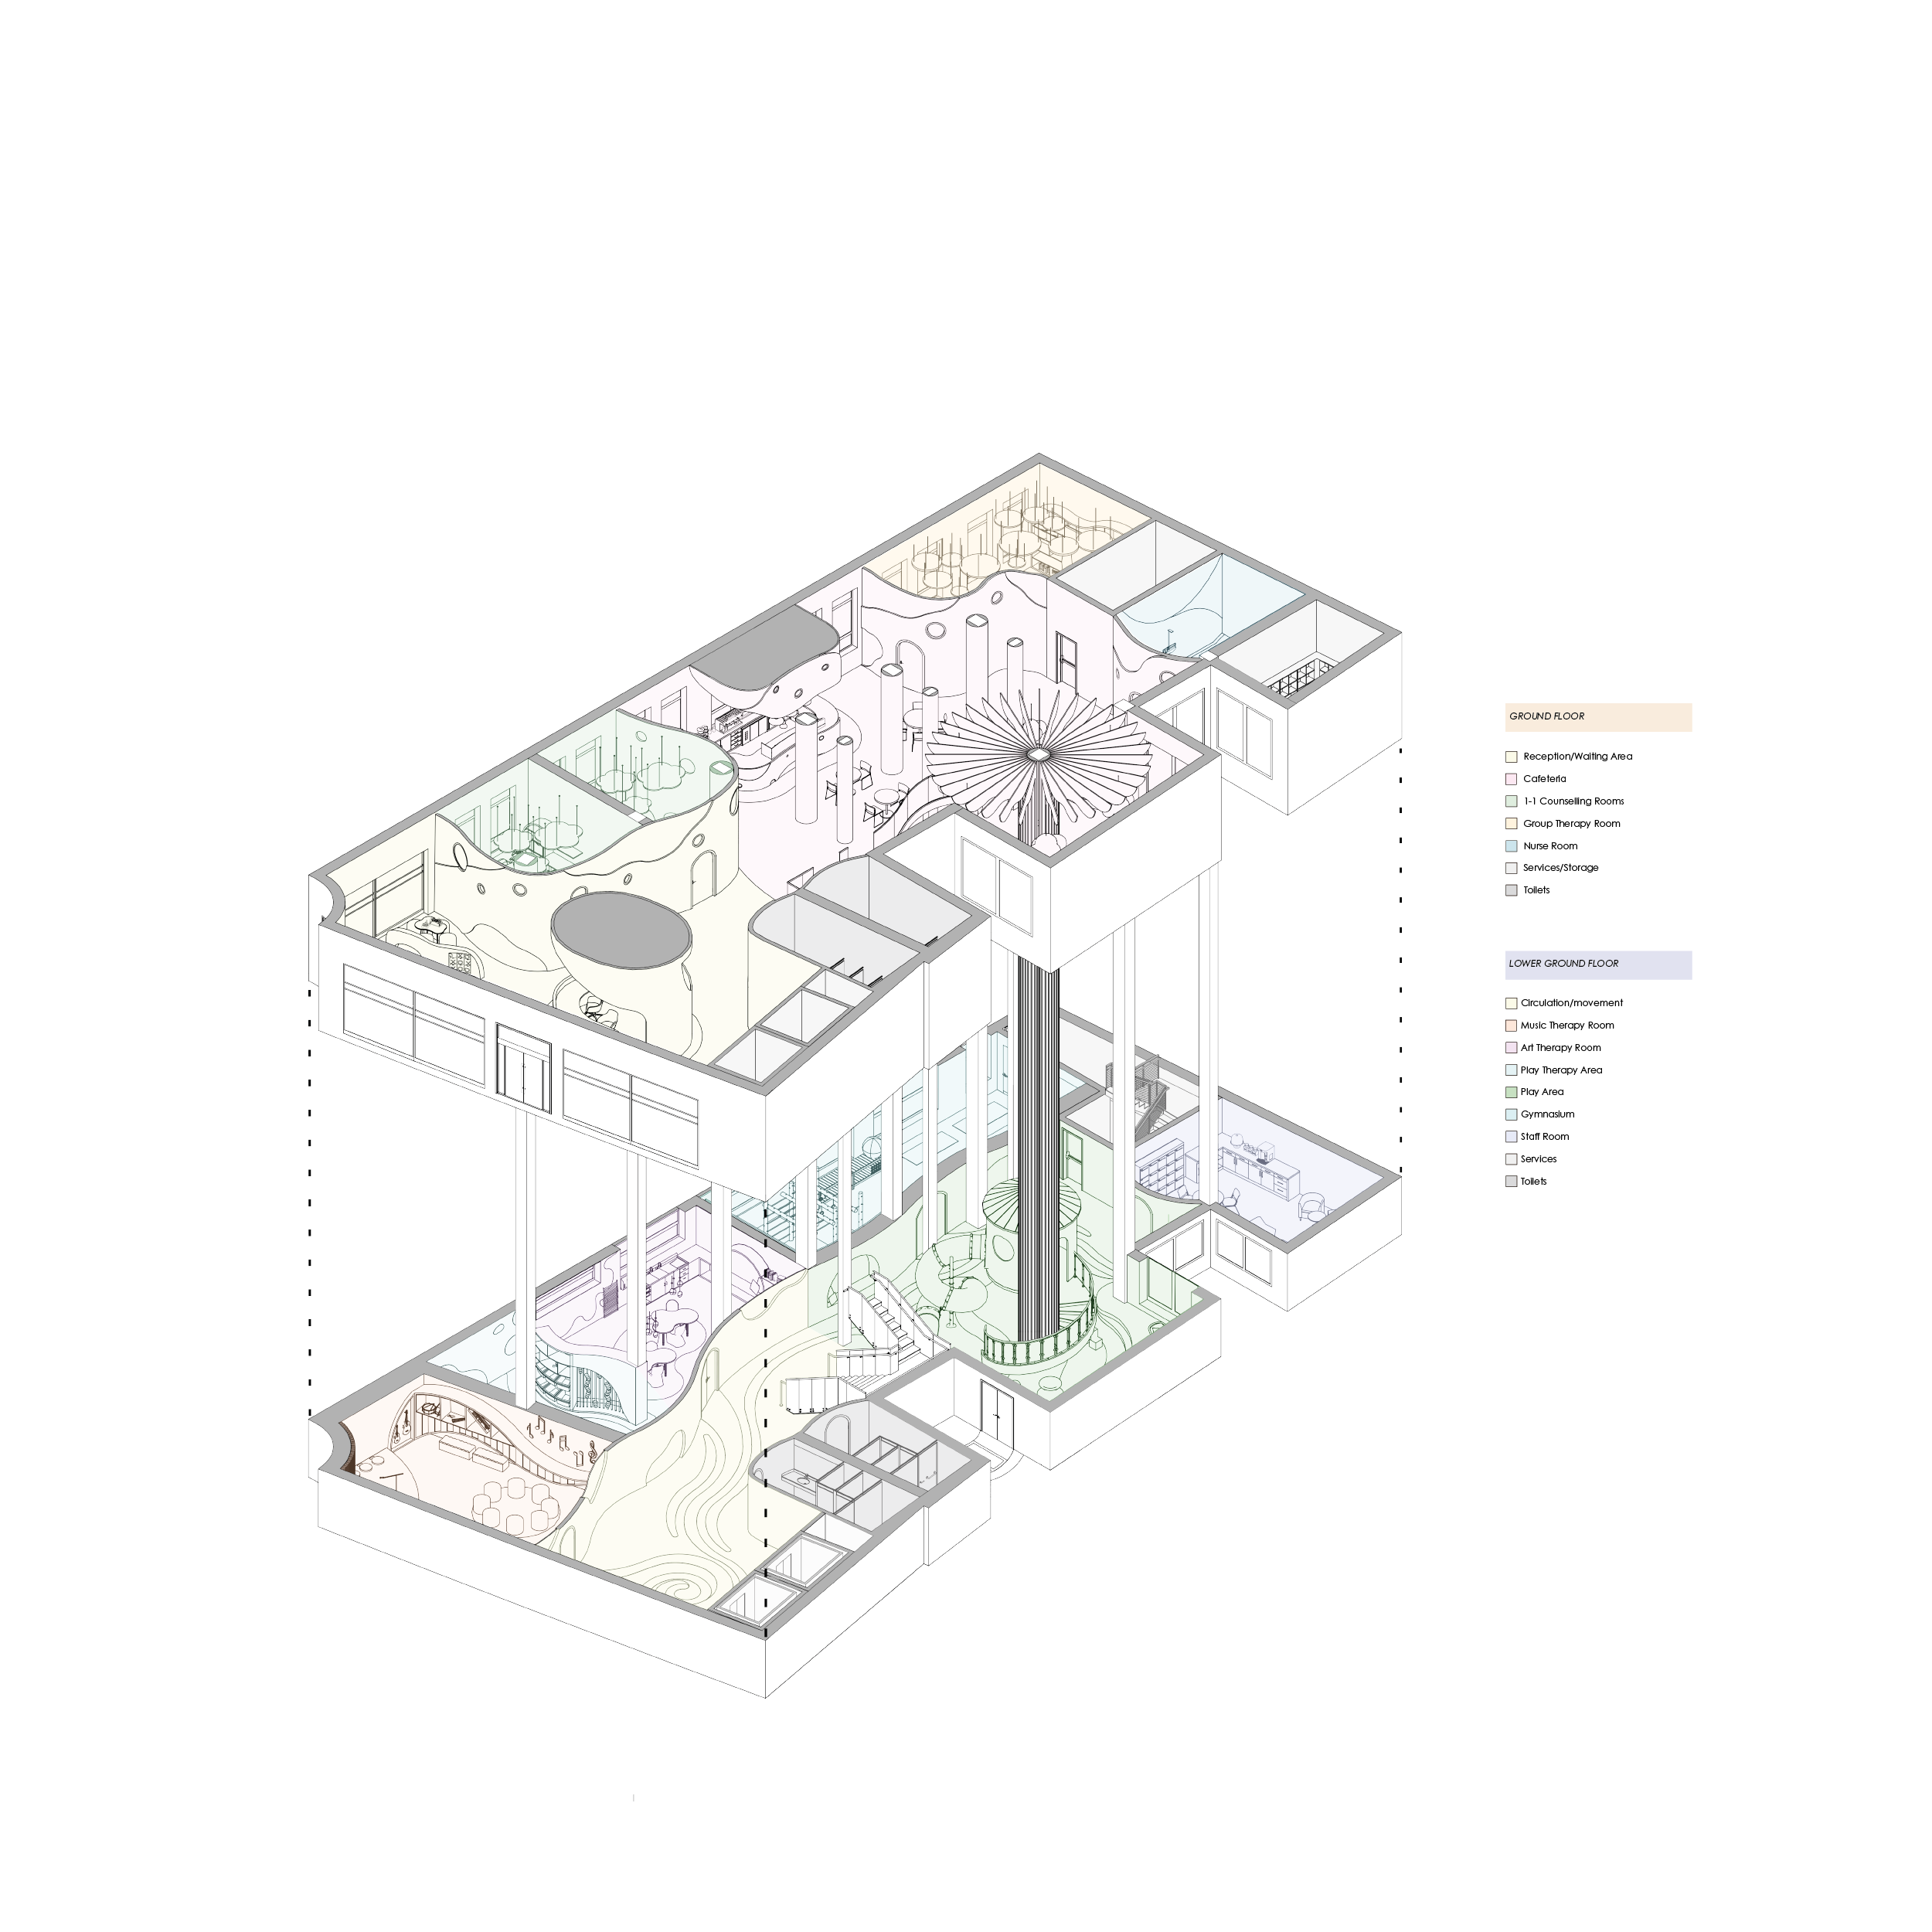 Axonometric diagram by Nada Abu-Seido showing bottom two floors of the building being utilised